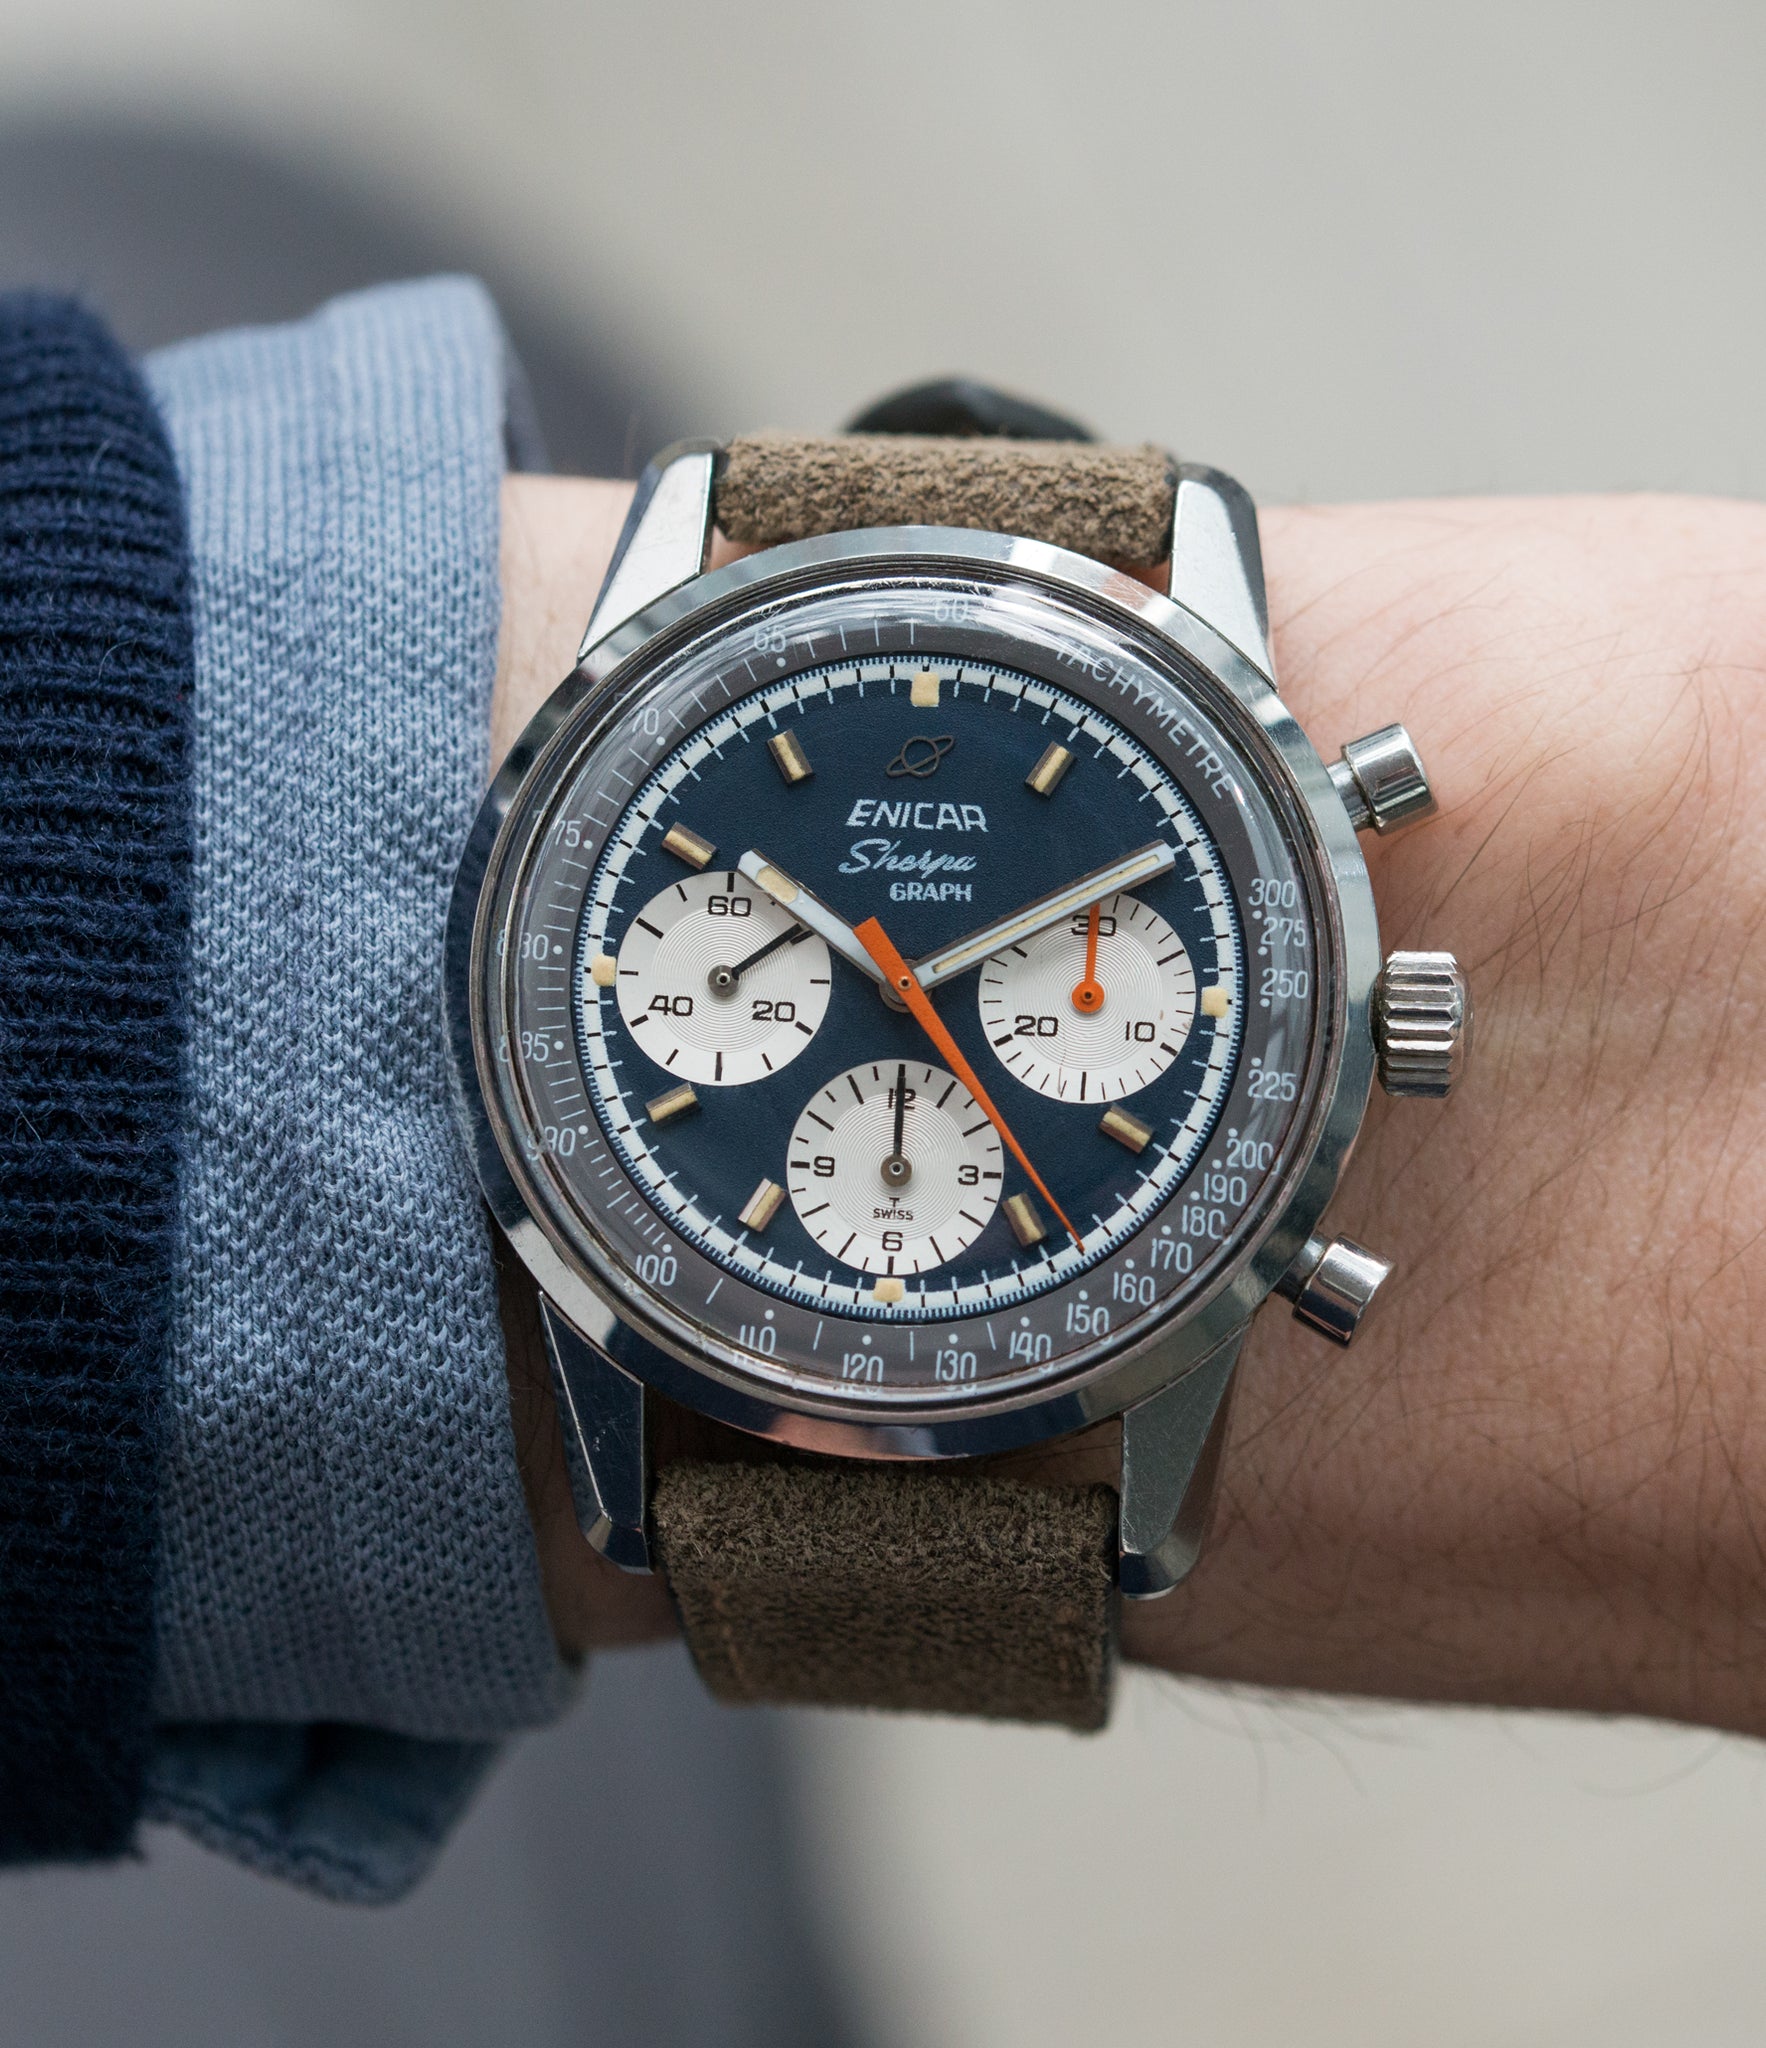 gent classic sport vintage watch Jim Clark Mark IV Enicar Sherpa Graph 300 Ref. 072-02-01 steel chronograph sport racing watch for sale online at A Collected Man London UK vintage watch specialist